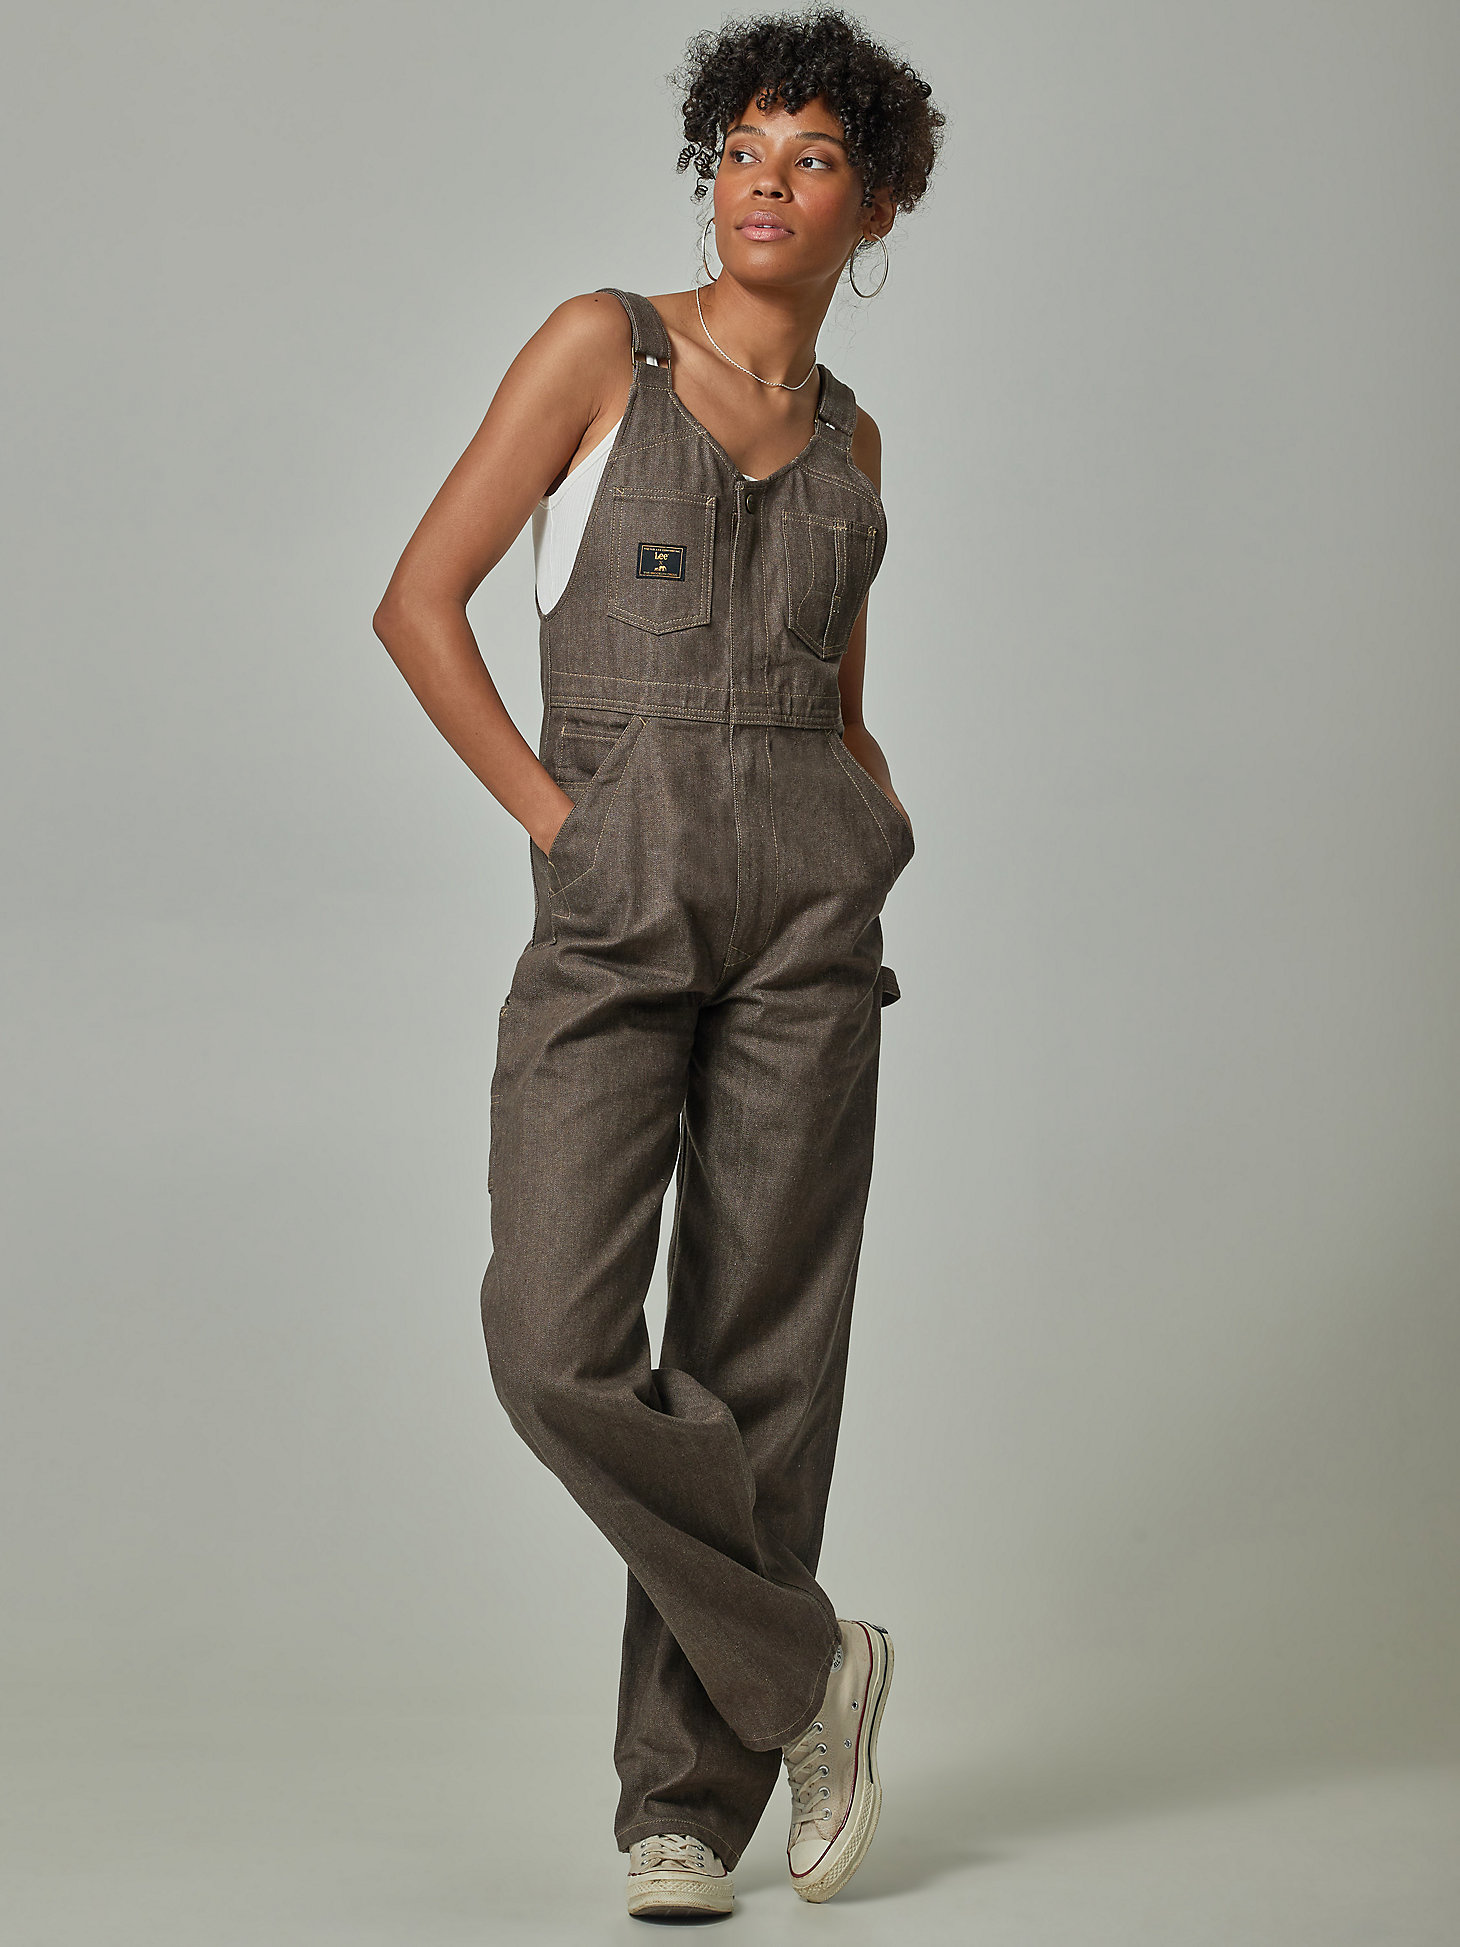 Women's Lee® x The Brooklyn Circus® Whizit Zip Bib Overall in Brown Selvedge main view